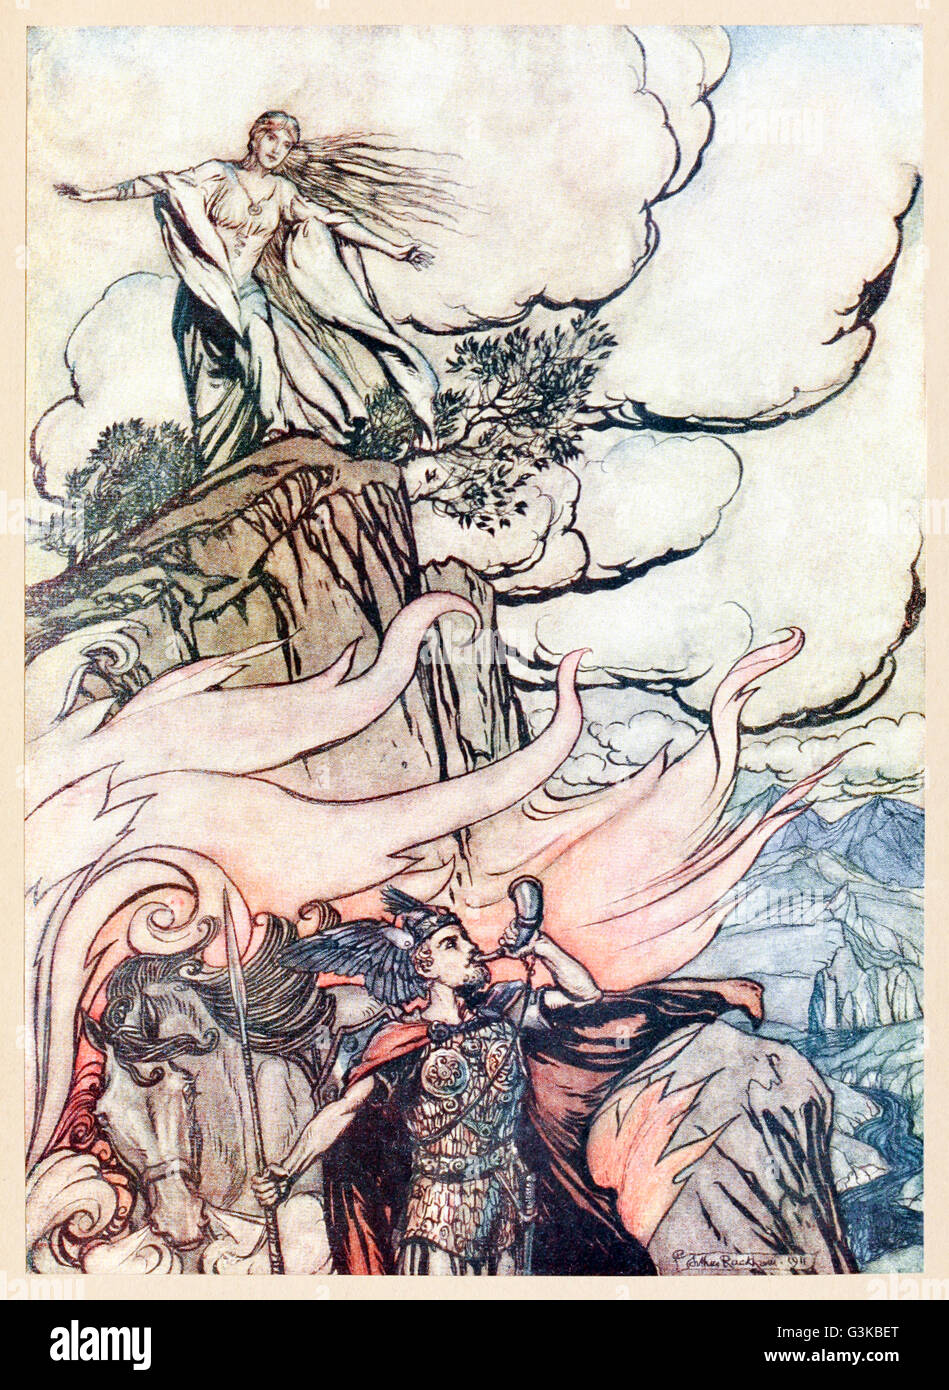 “Siegfried leaves Brunnhilde in search of adventure” from 'Siegfried & The Twilight of the Gods' illustrated by Arthur Rackham (1867-1939). See description for more information. Stock Photo